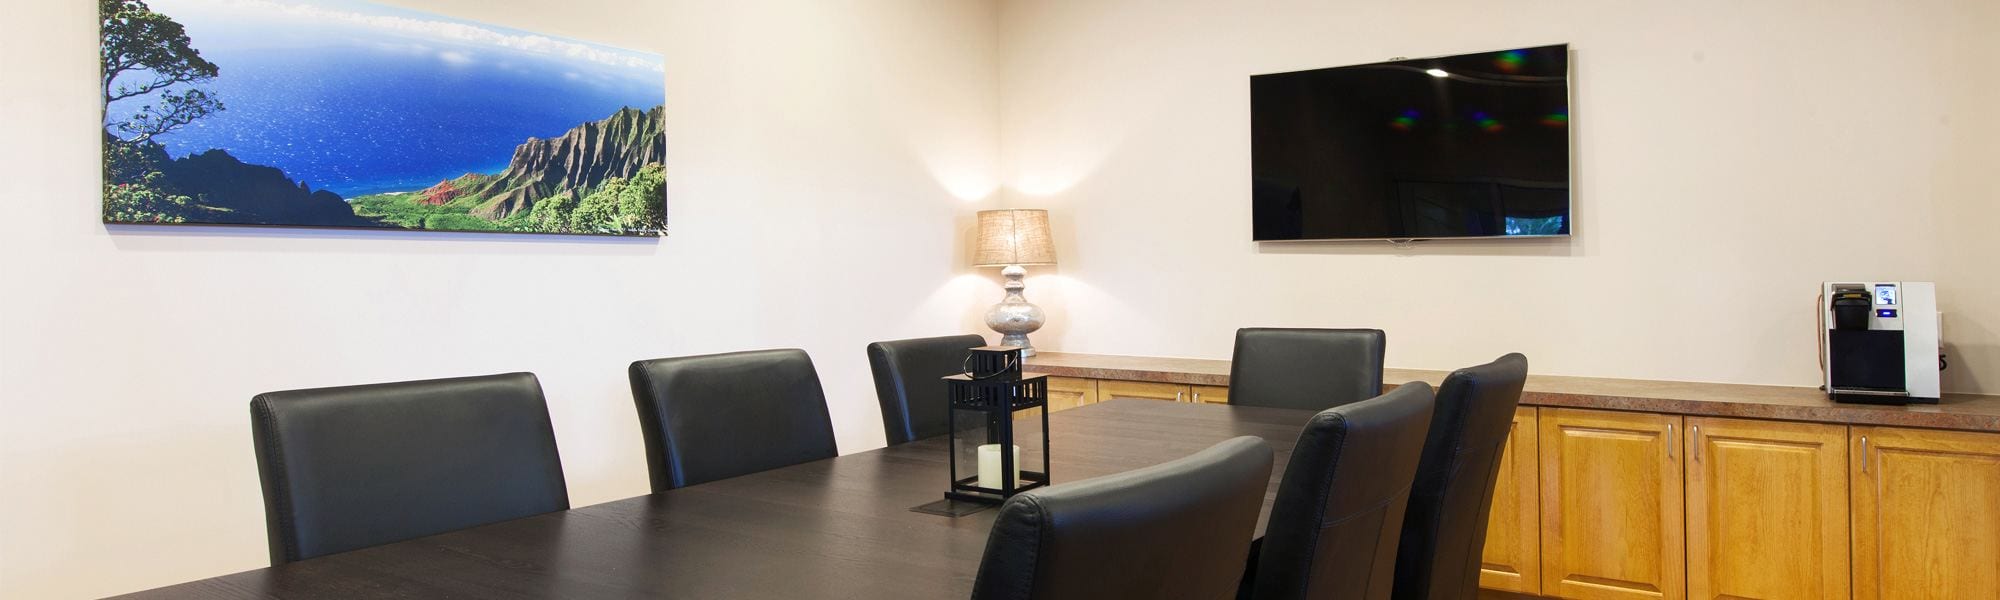 image of conference room amenities